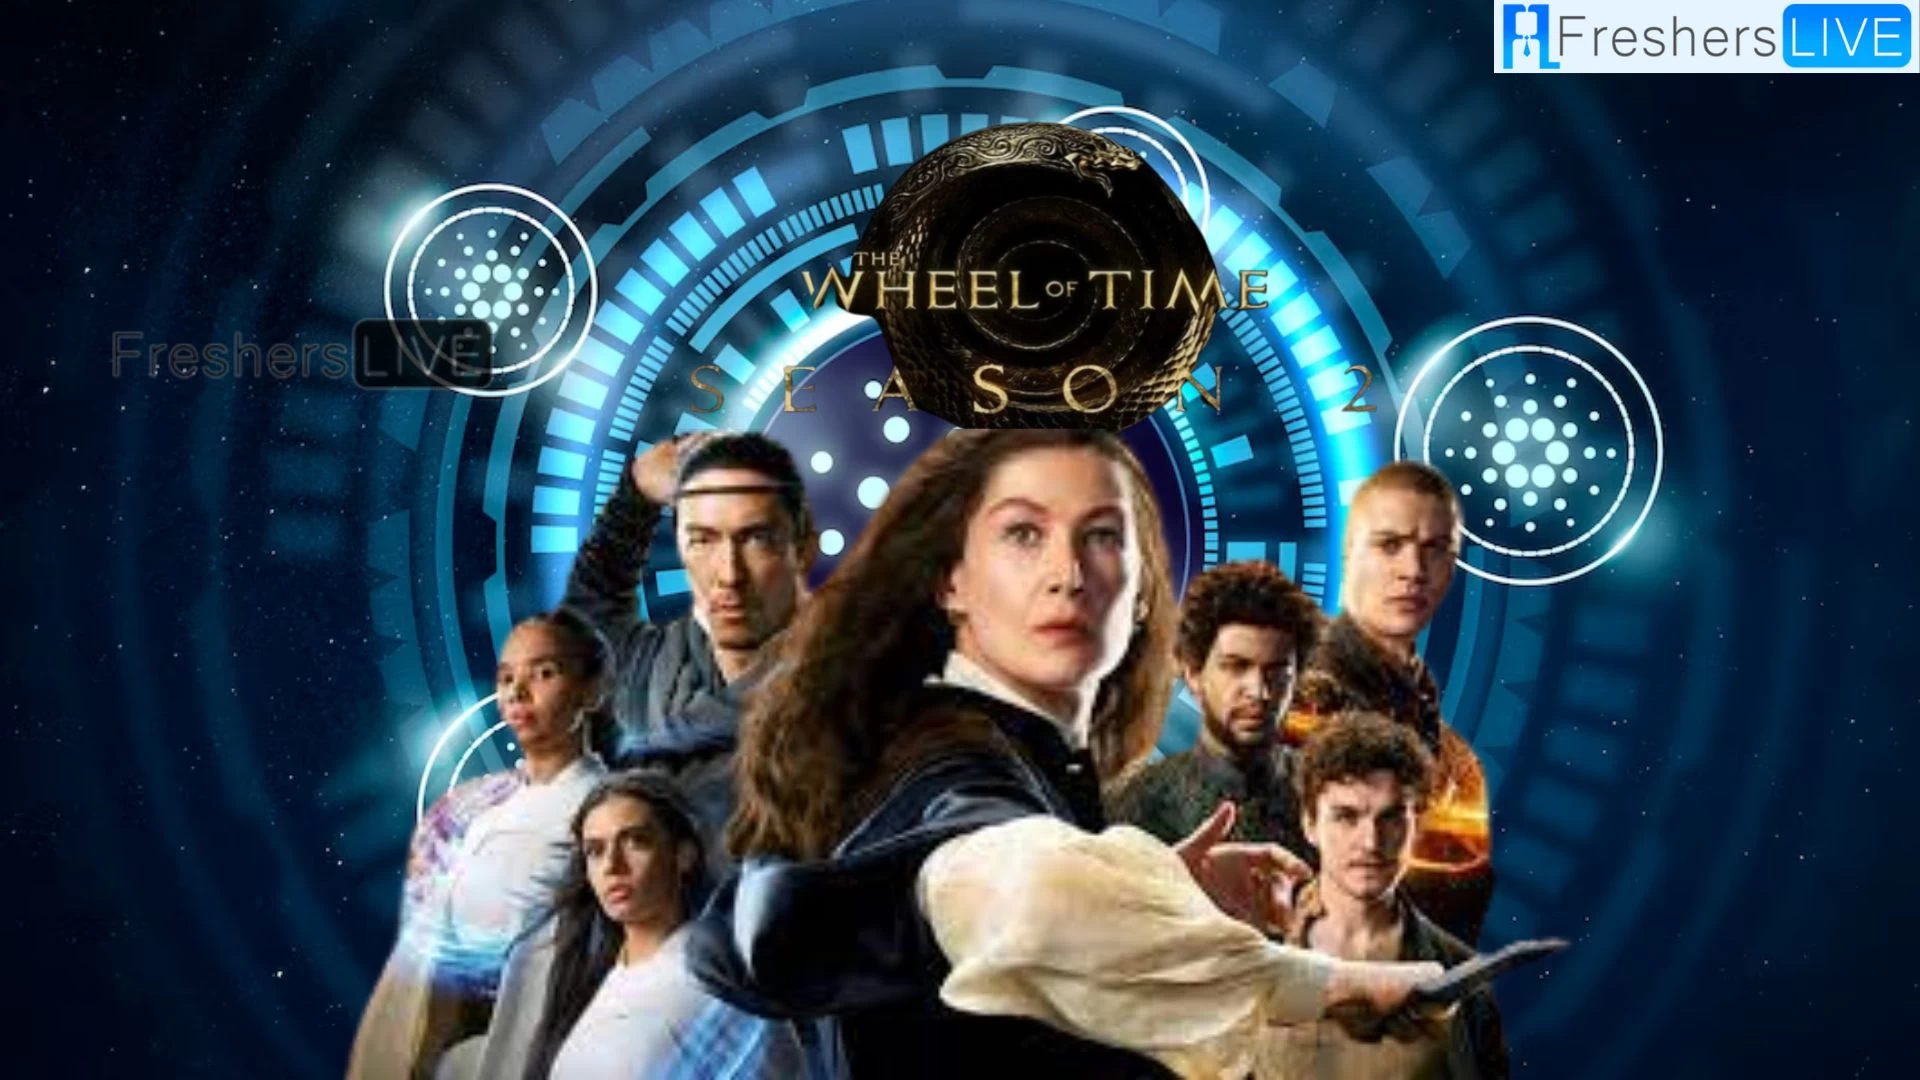 The Wheel of Time Season 2 Episode 8 Ending Explained, Release Date, Cast, Plot, Review, Where to Watch and More